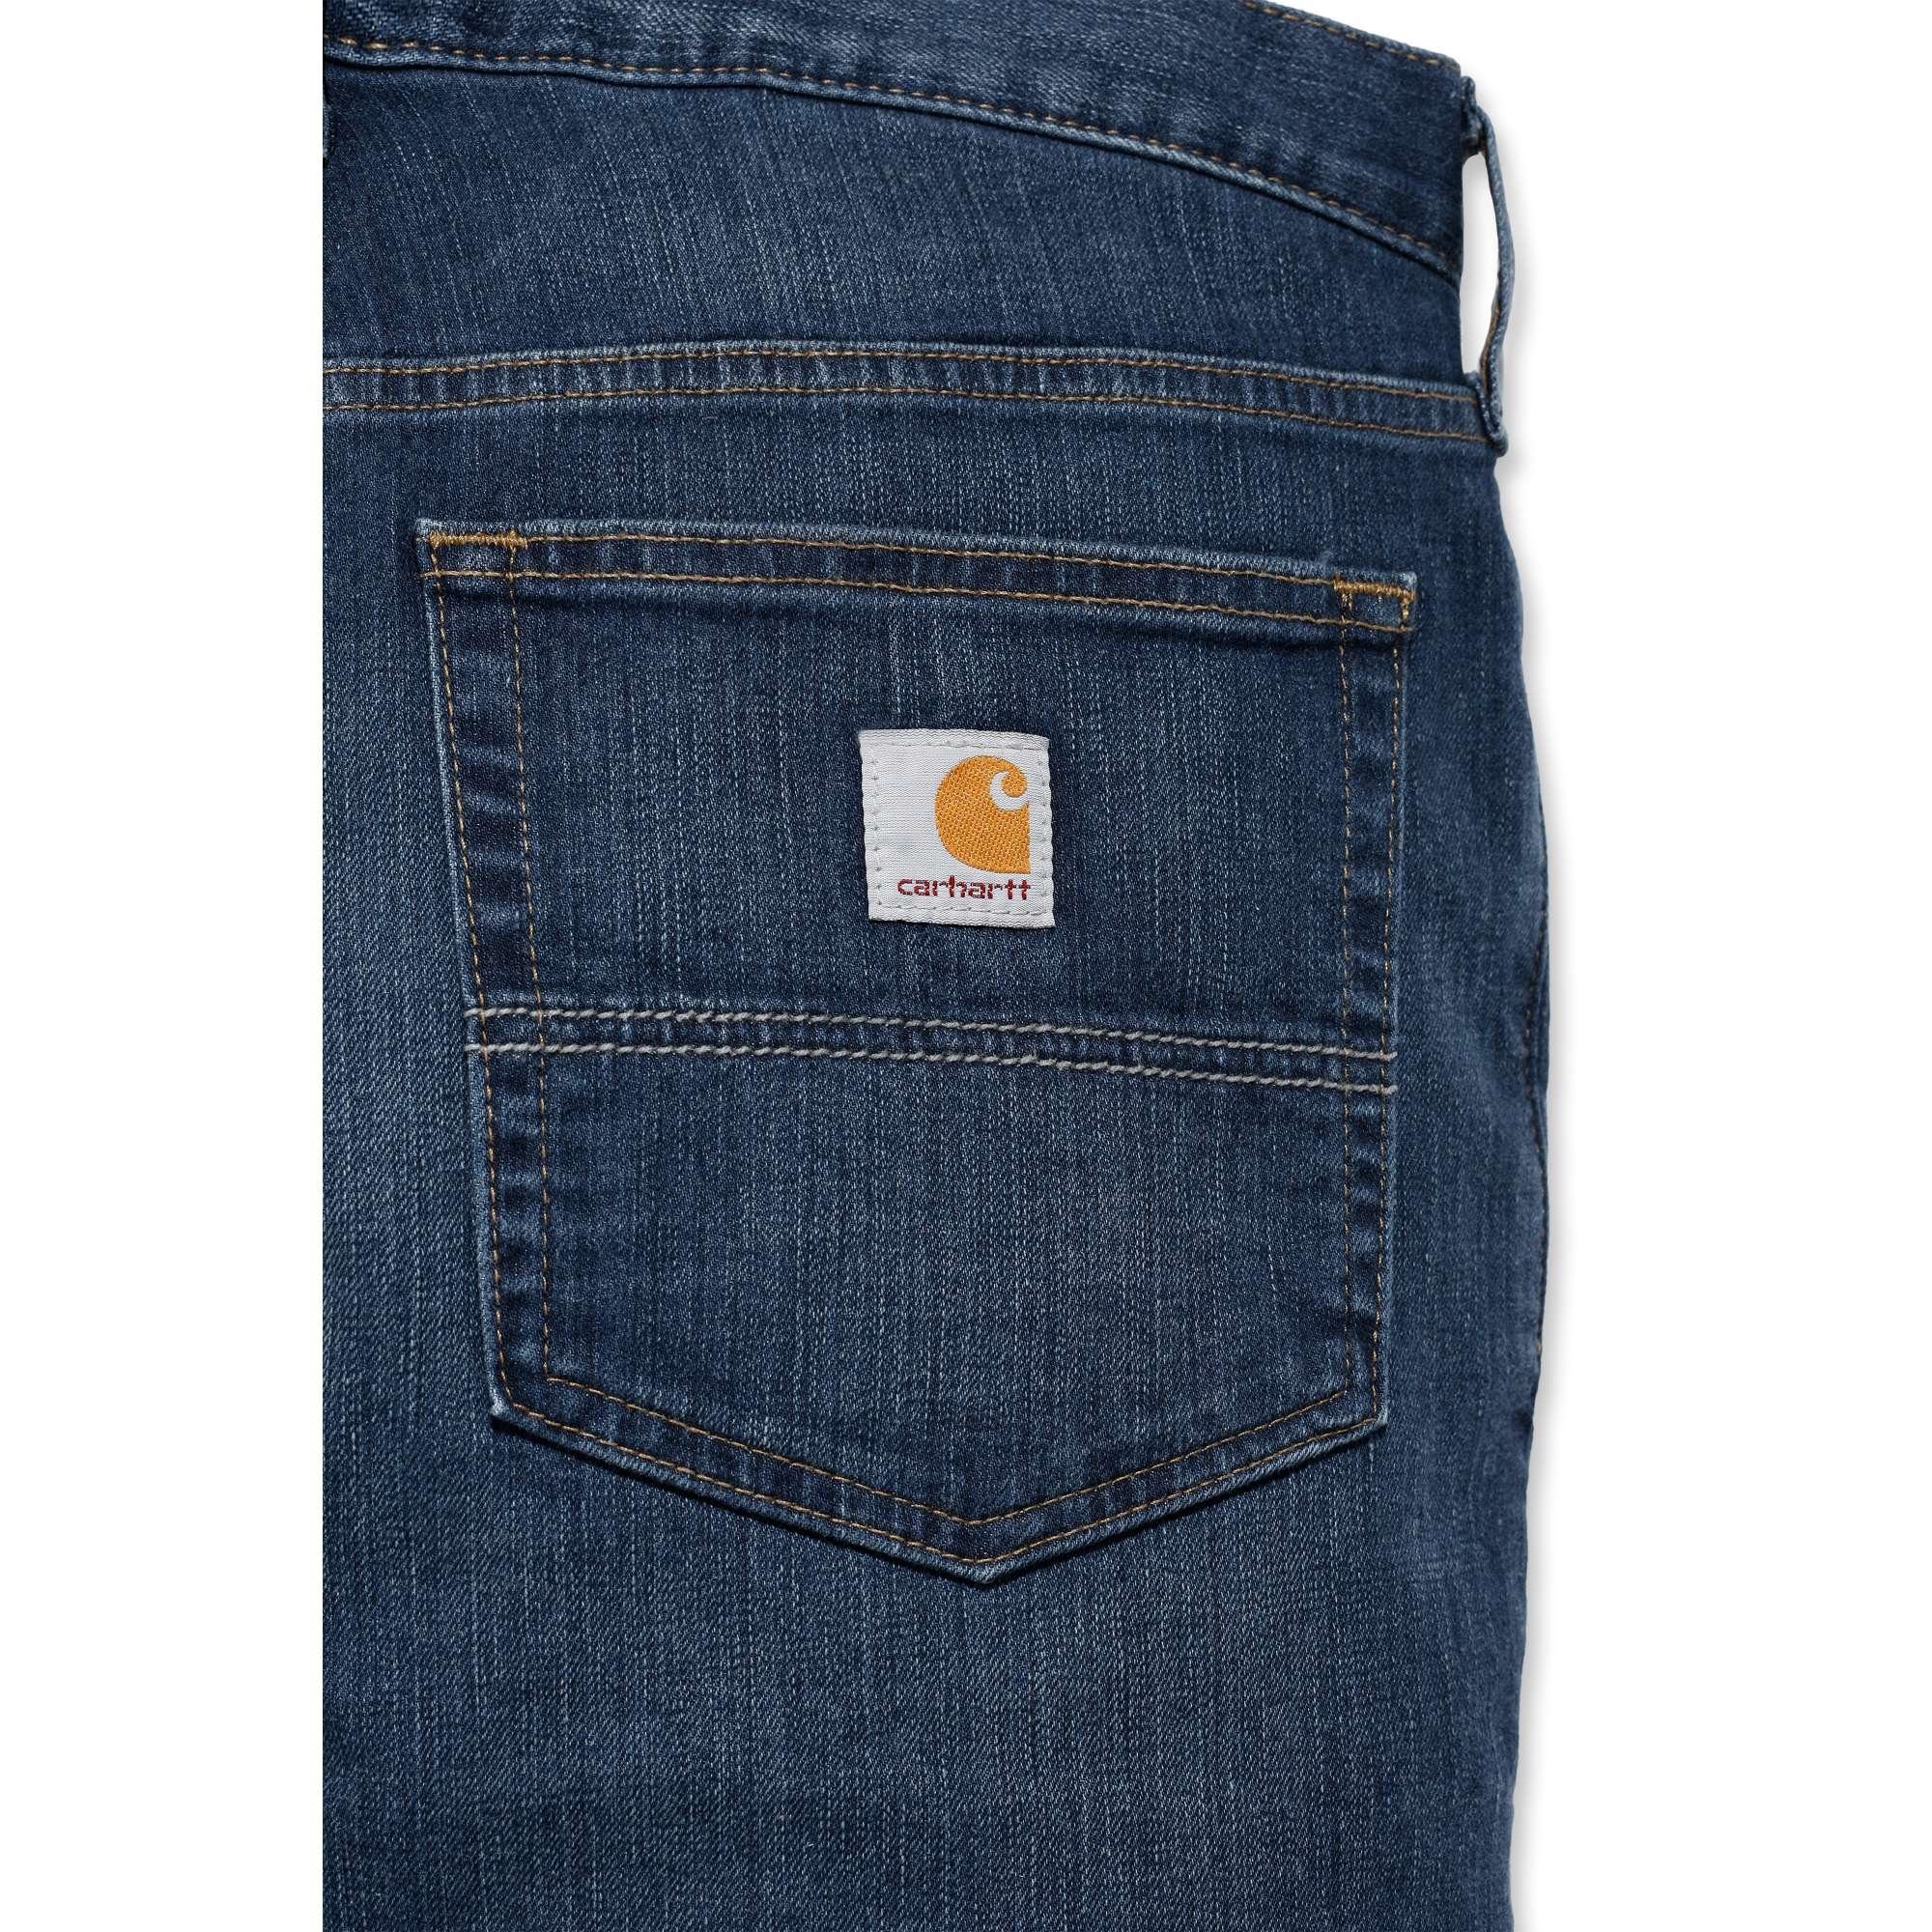 Carhartt Stretch-Jeans chambray RUGGED blue (1-tlg) FLEX RELAXED STRAIGHT JEAN light